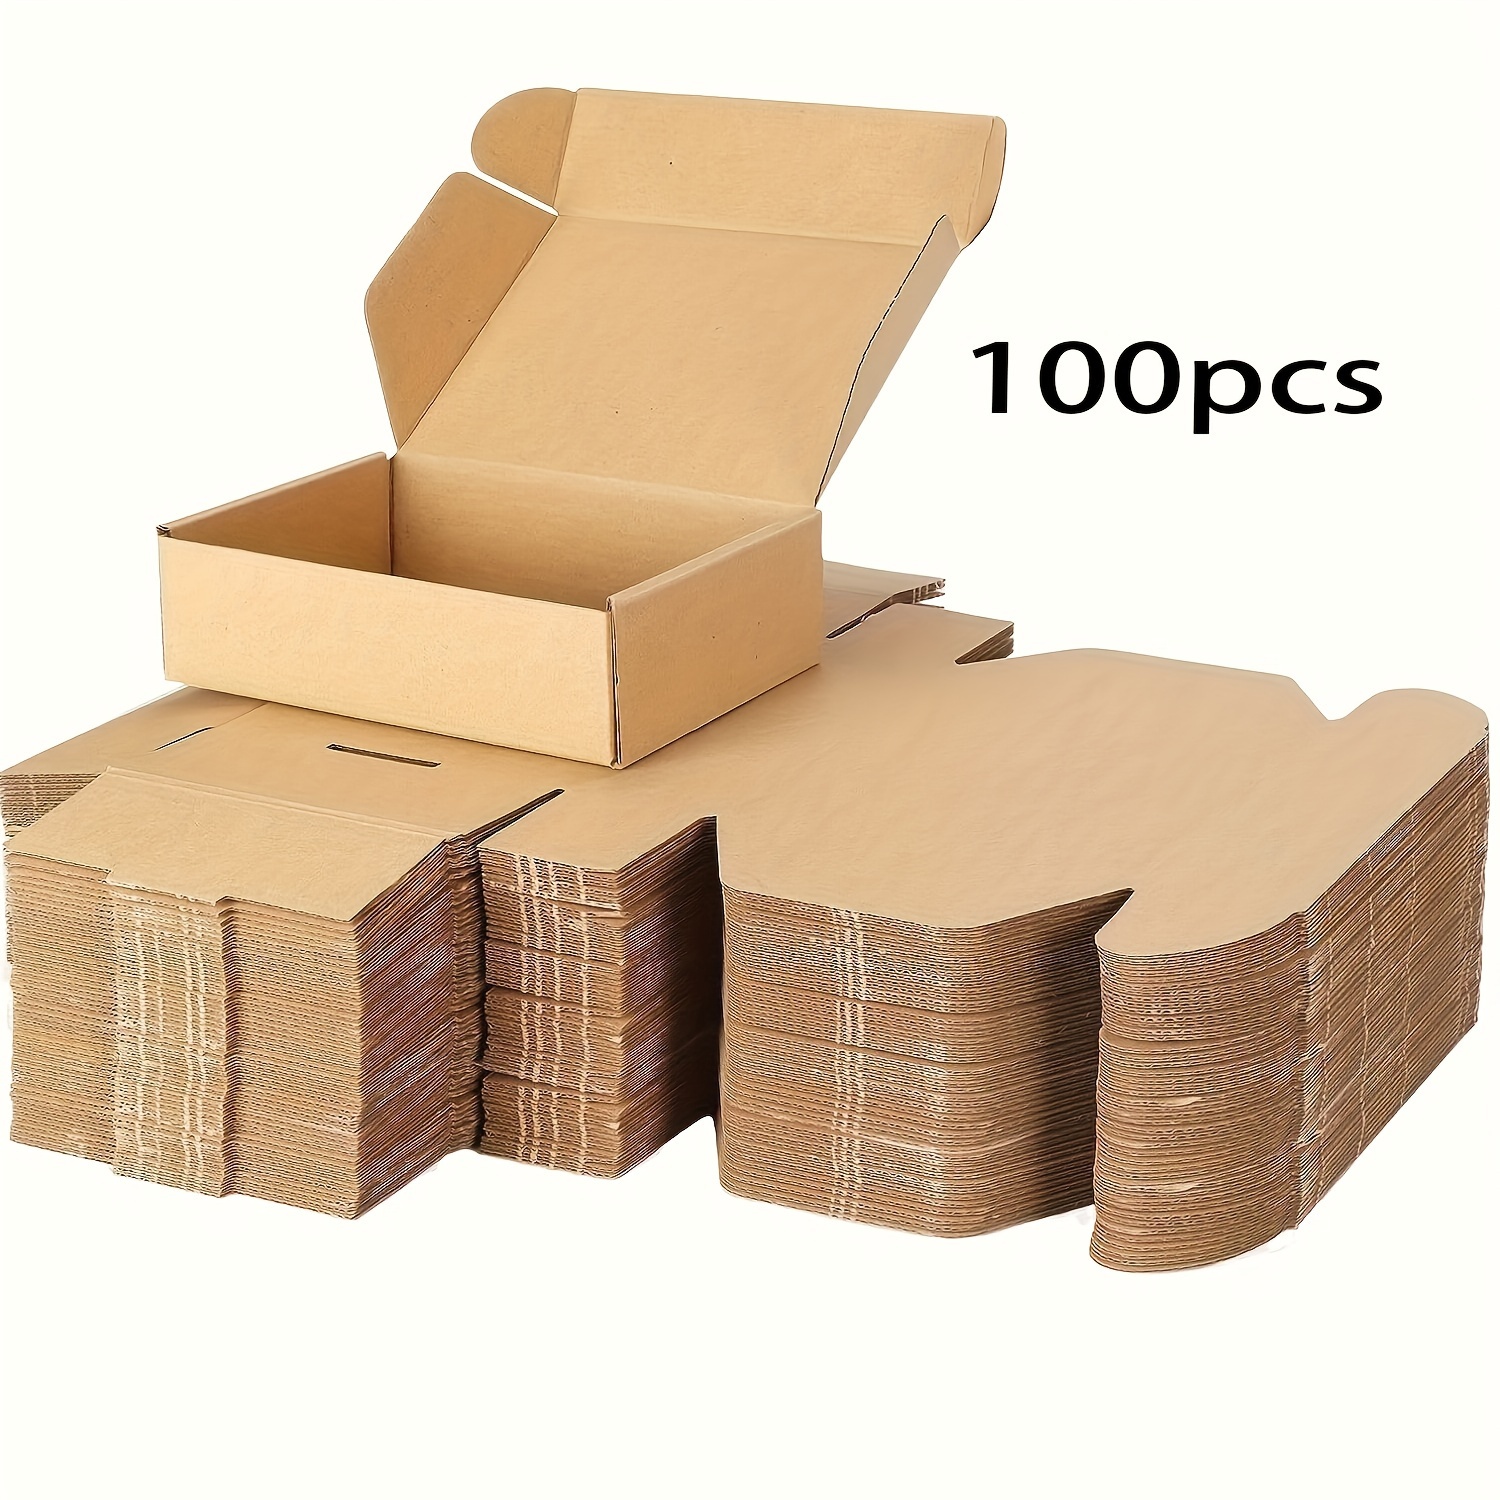 

100-pack Small Corrugated Cardboard Mailer Boxes 6x4x1.5 Inch, Brown Packing Boxes For Shipping, Small Business Packaging, And Gift Giving